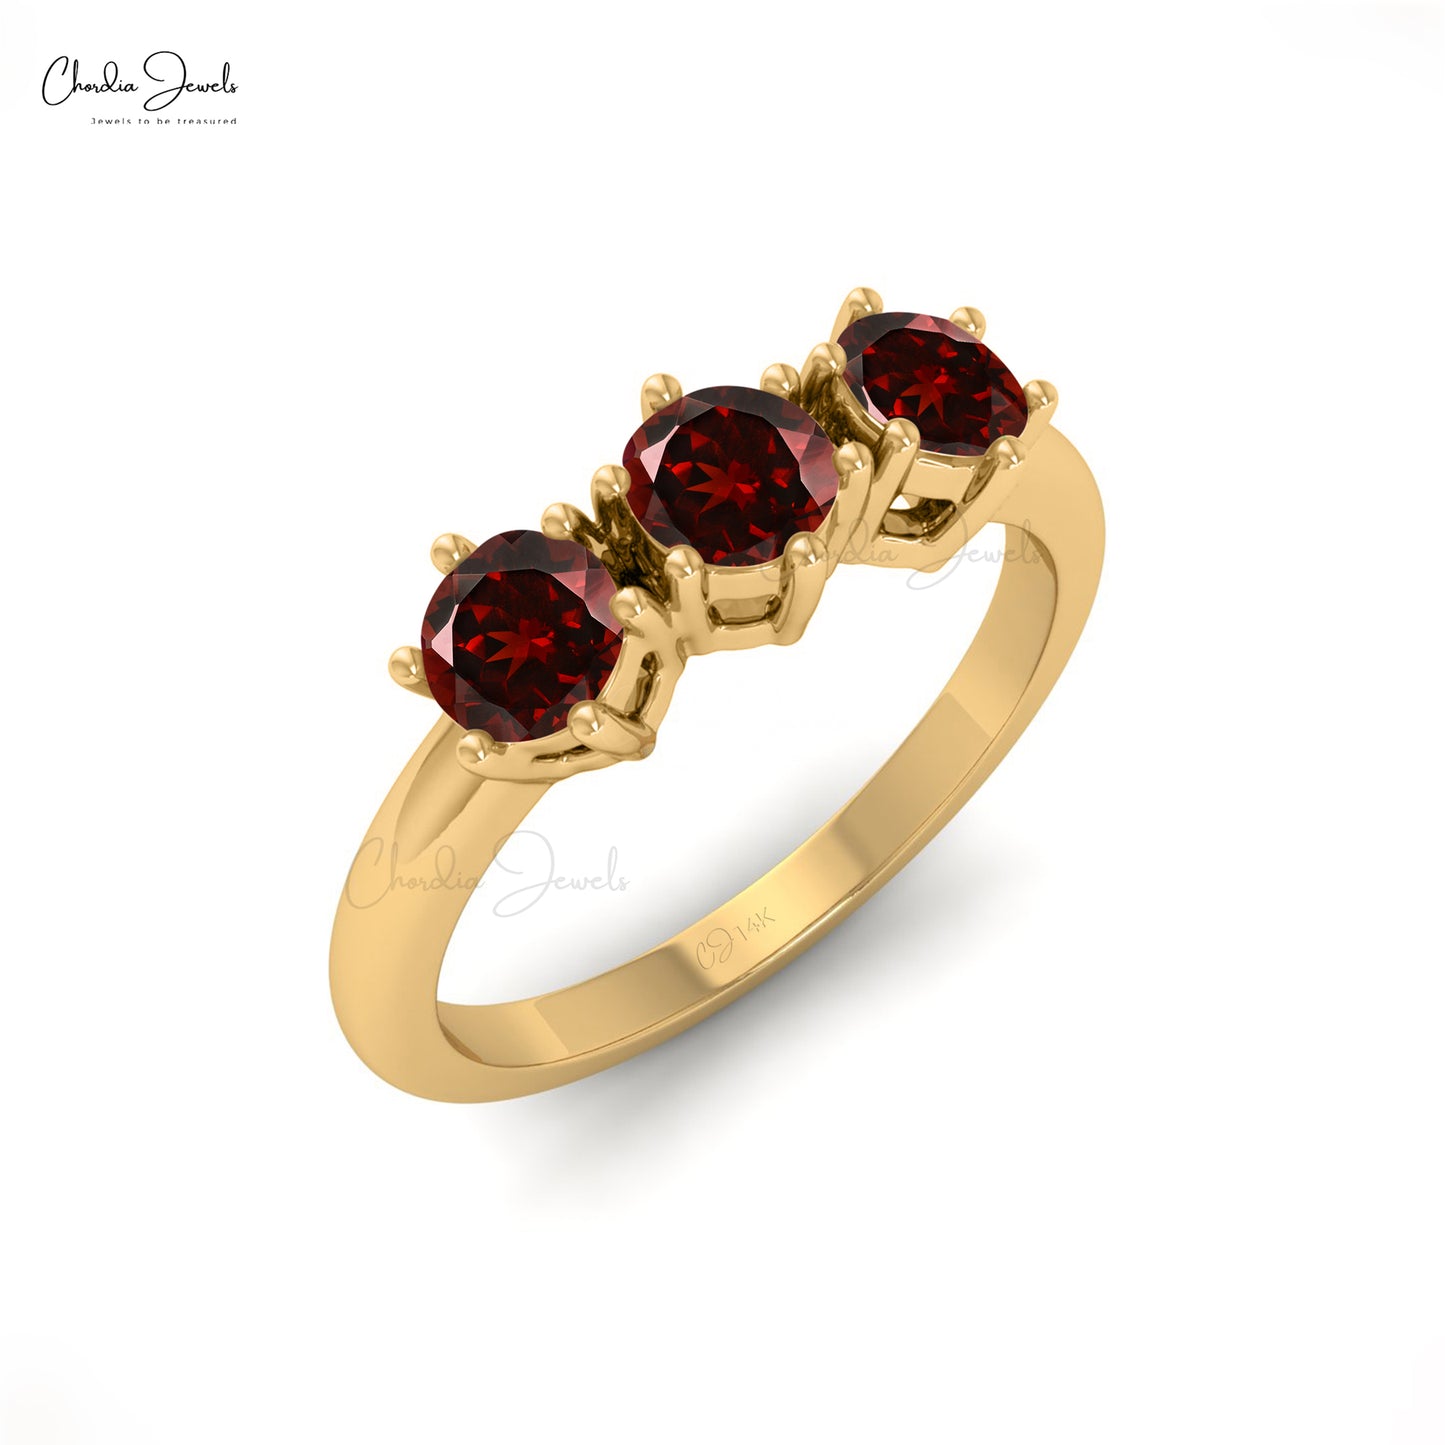 4mm Natural Garnet Trilogy Ring in Real Gold | Chordia Jewels